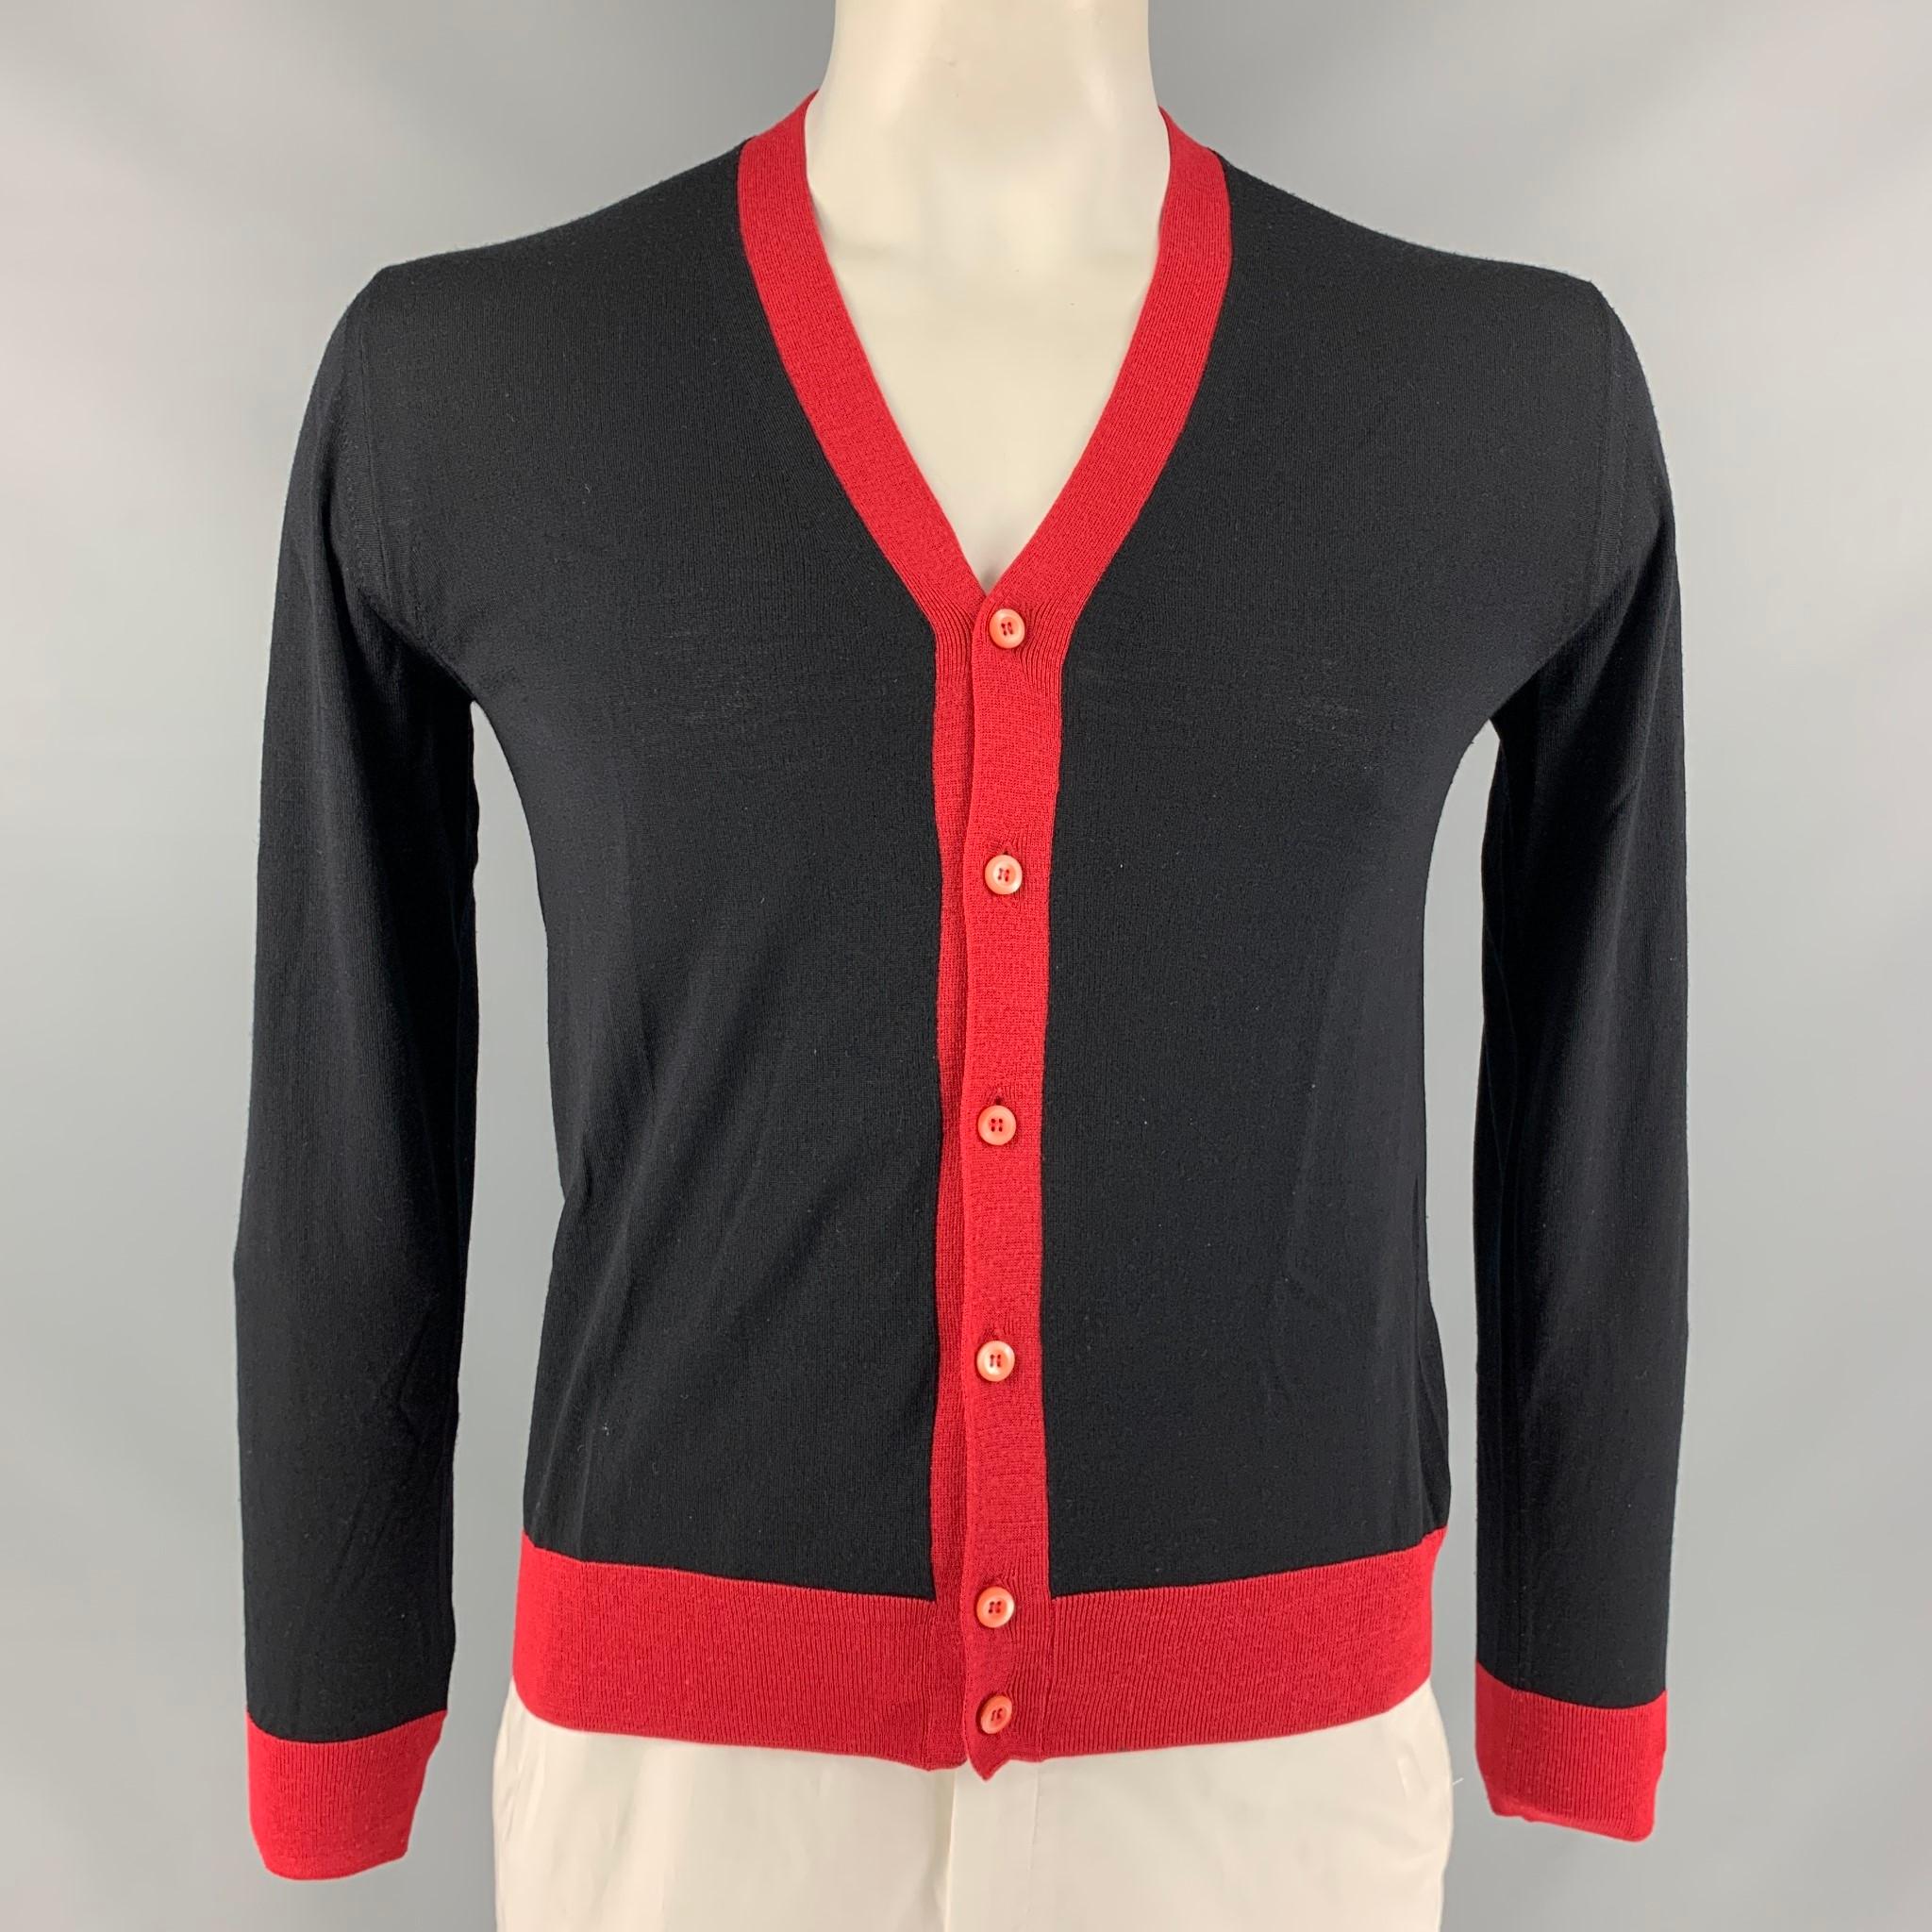 PRADA V- neck cardigan comes in black and red color block knit fabric. Made in Italy.

Very Good Pre-Owned Condition.
Marked: 46

Measurements:

Shoulder: 18 in.
Chest: 44 in.
Sleeve: 24.5 in.
Length: 25 in.   

 

SKU: 113562
Category: